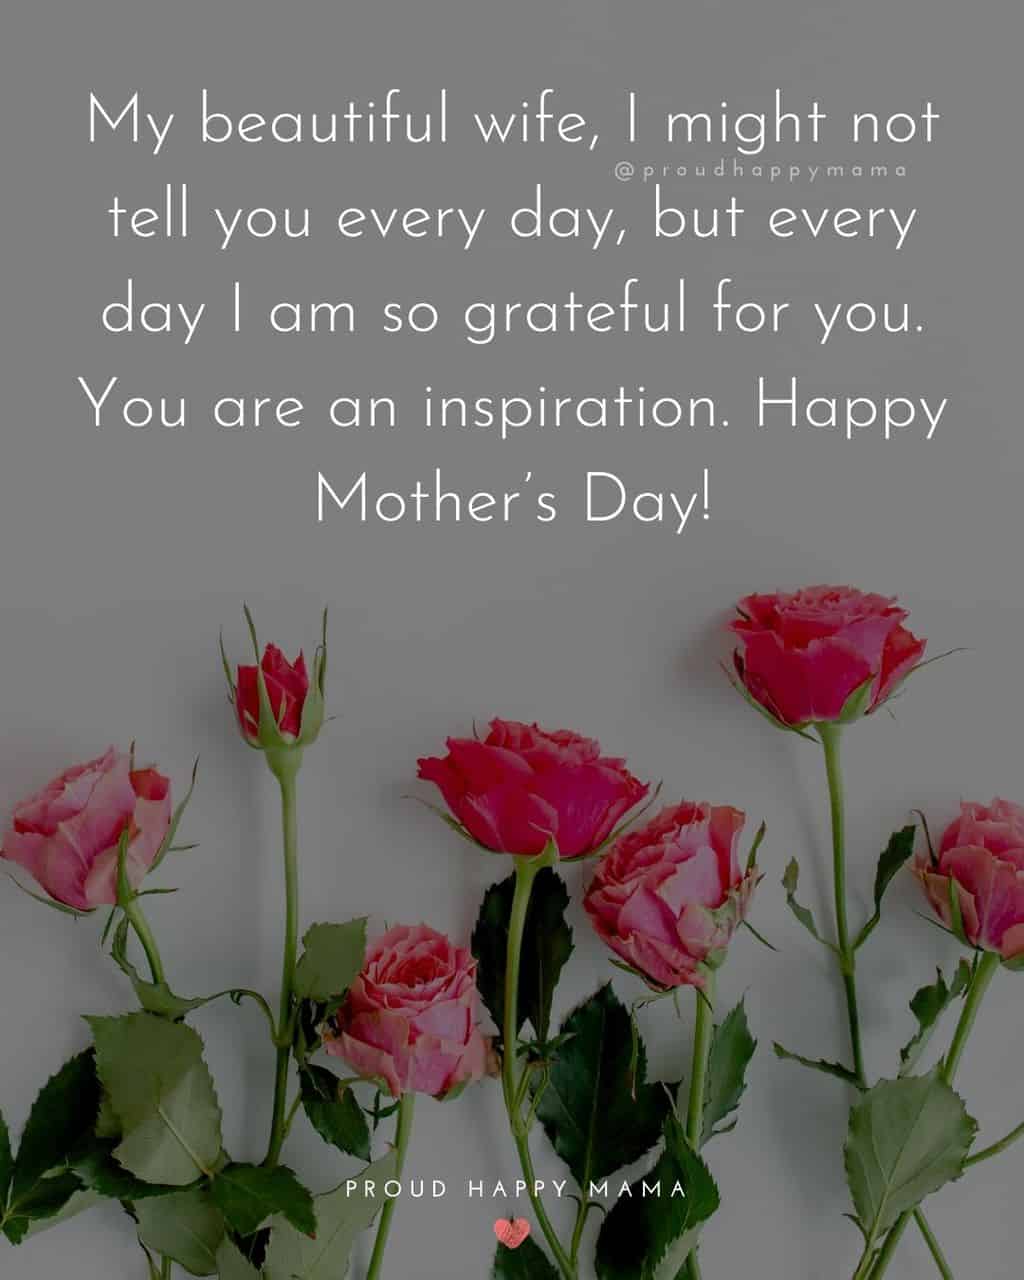 Happy Mothers Day Quotes For Wife - My beautiful wife, I might not tell you every day, but every day I am so grateful for you. You